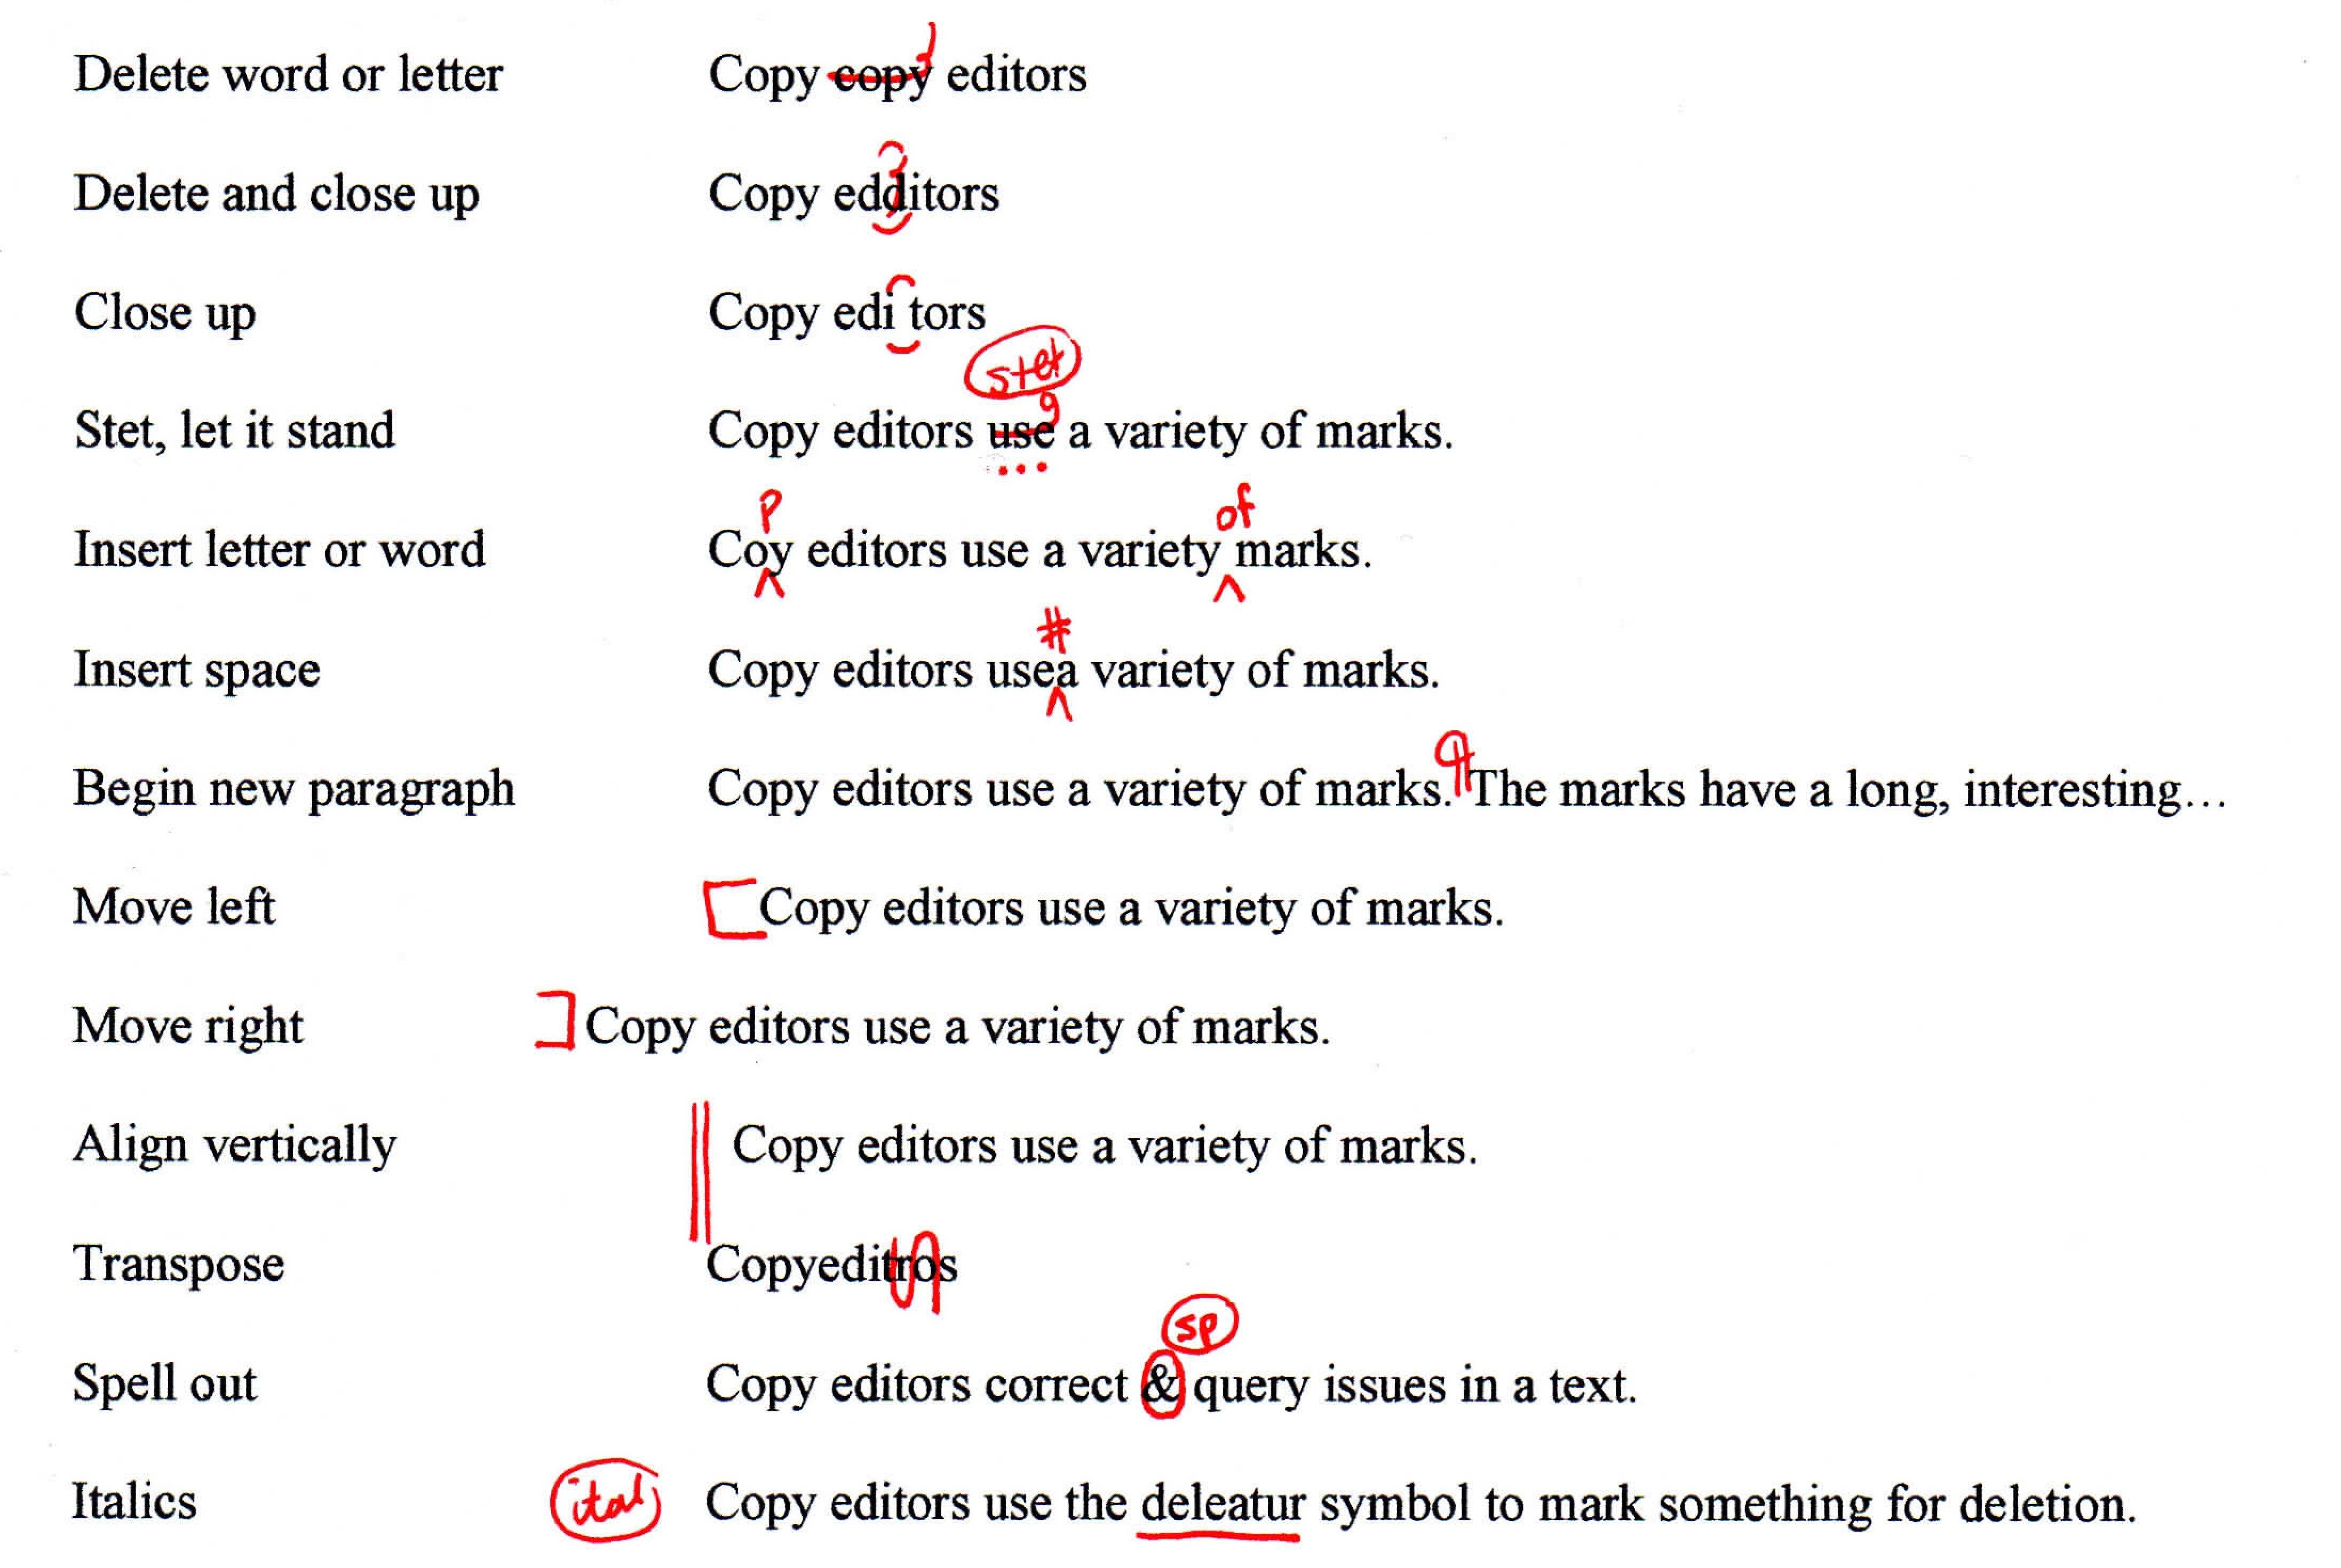 Proofreading and copy editing symbols associated